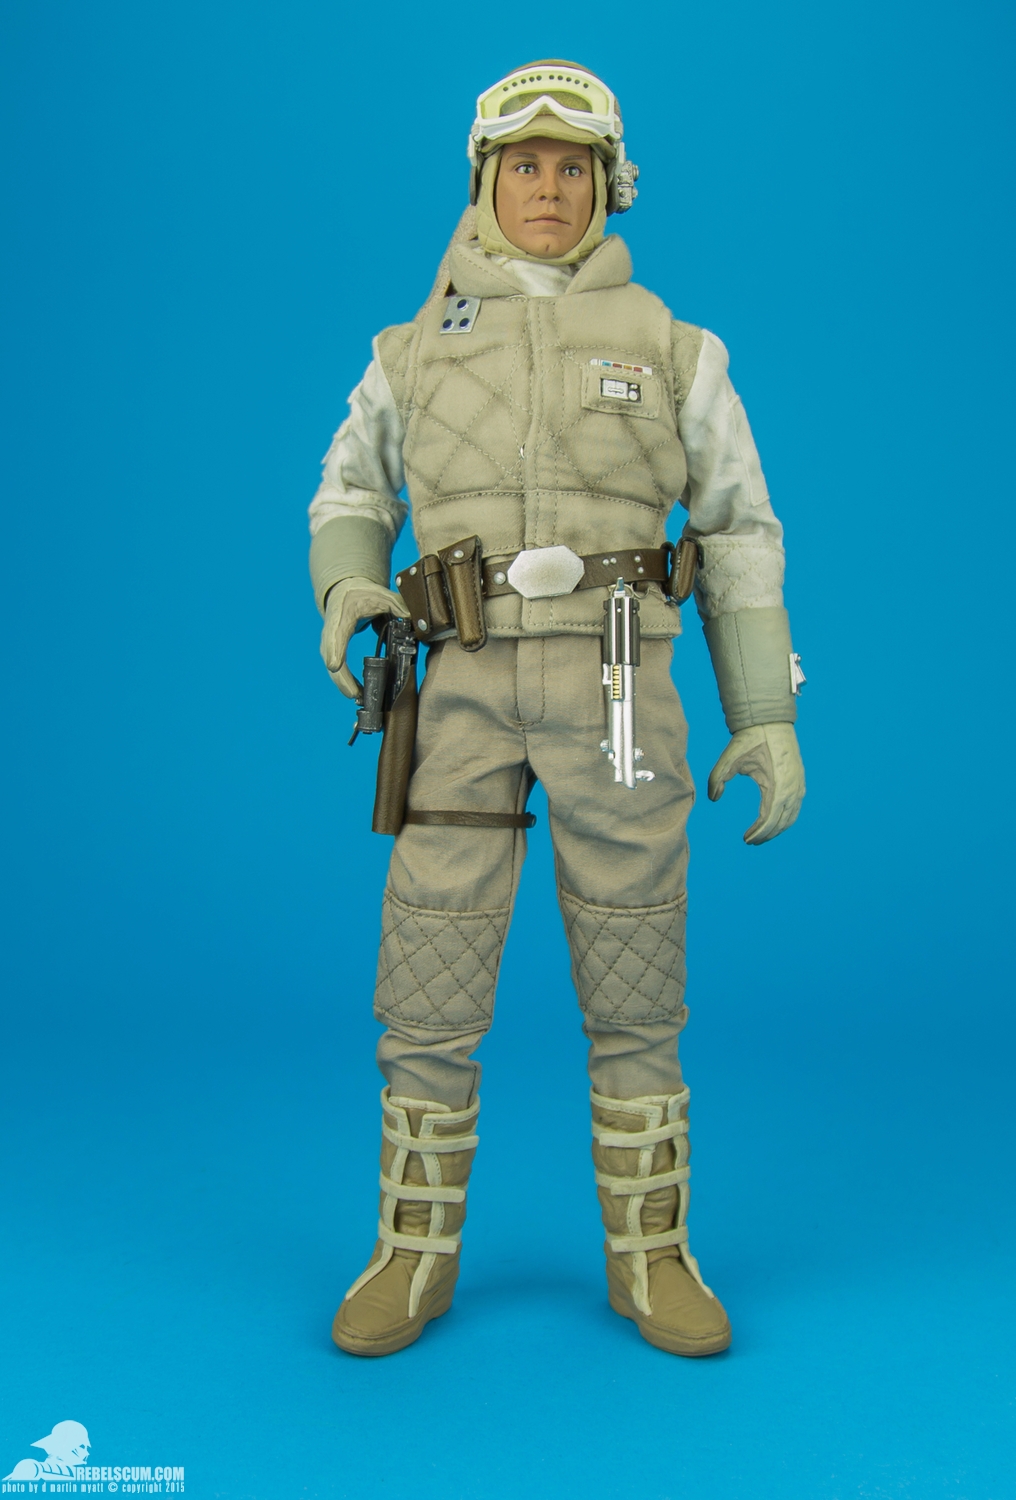 Luke-Skywalker-Hoth-Sixth-Scale-Sideshow-Collectibles-Star-Wars-044.jpg